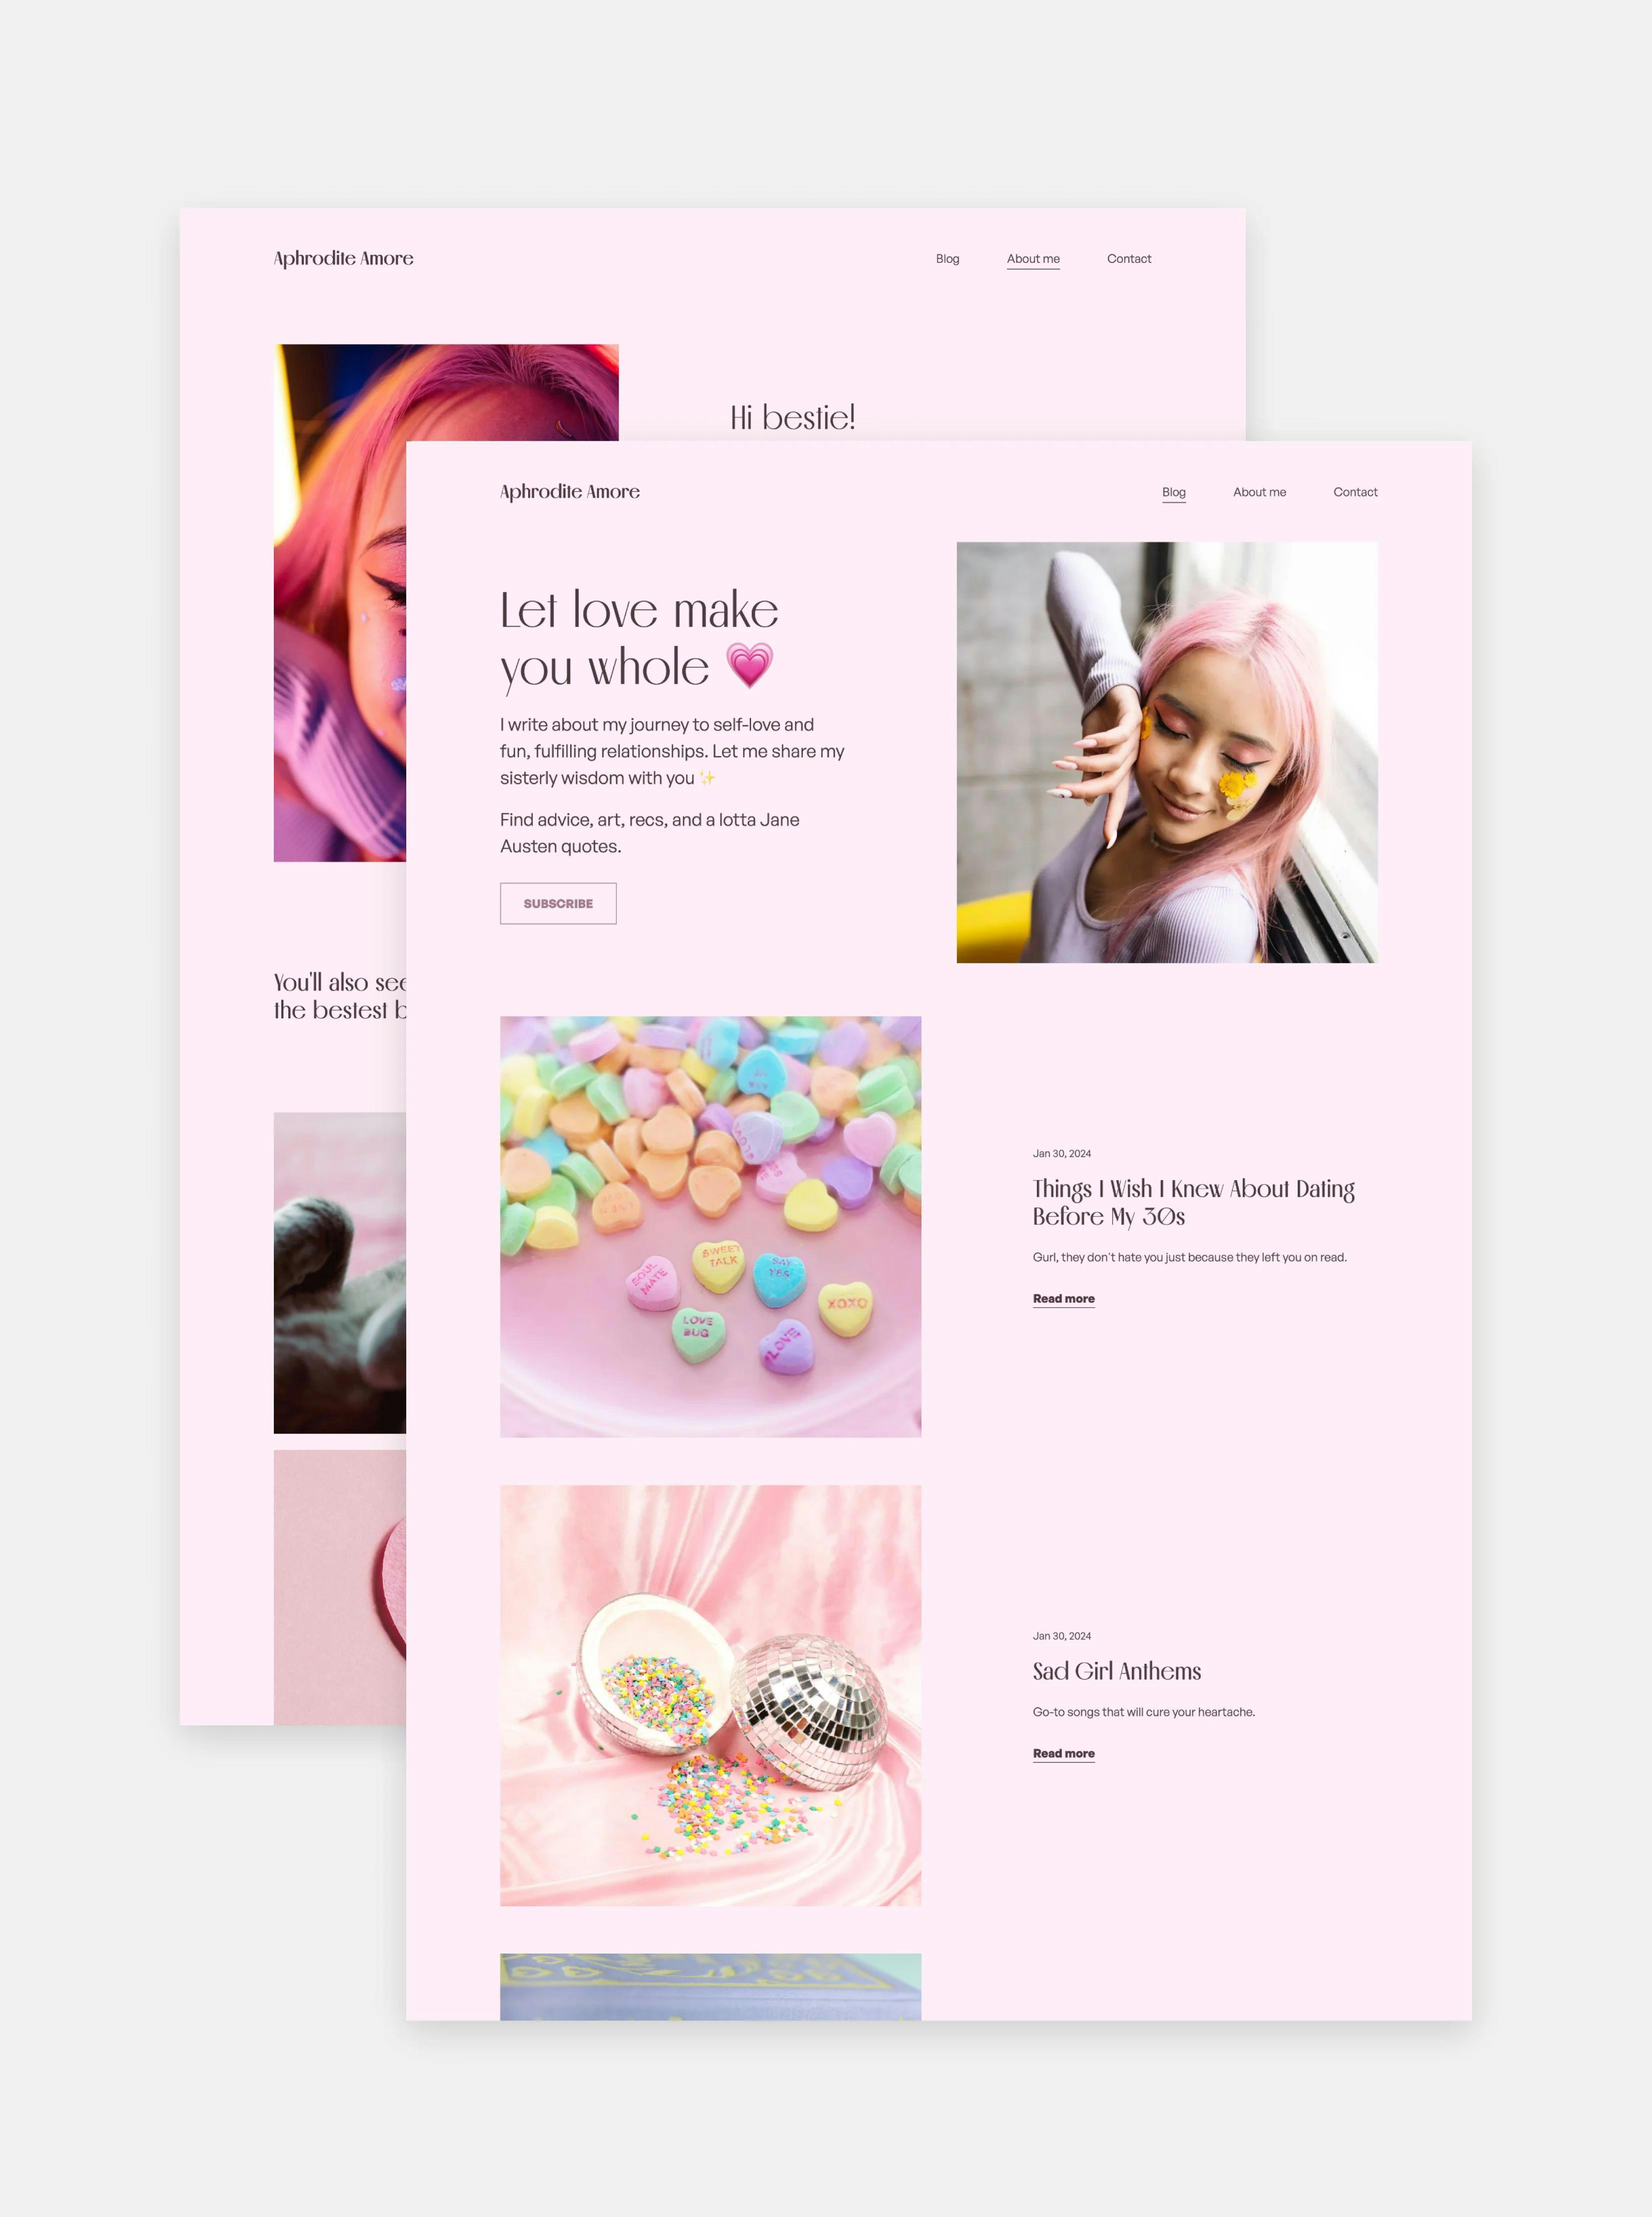 A Valentine's inspired blog made with Copyfolio, featuring a pink background and Valentine's day themed images